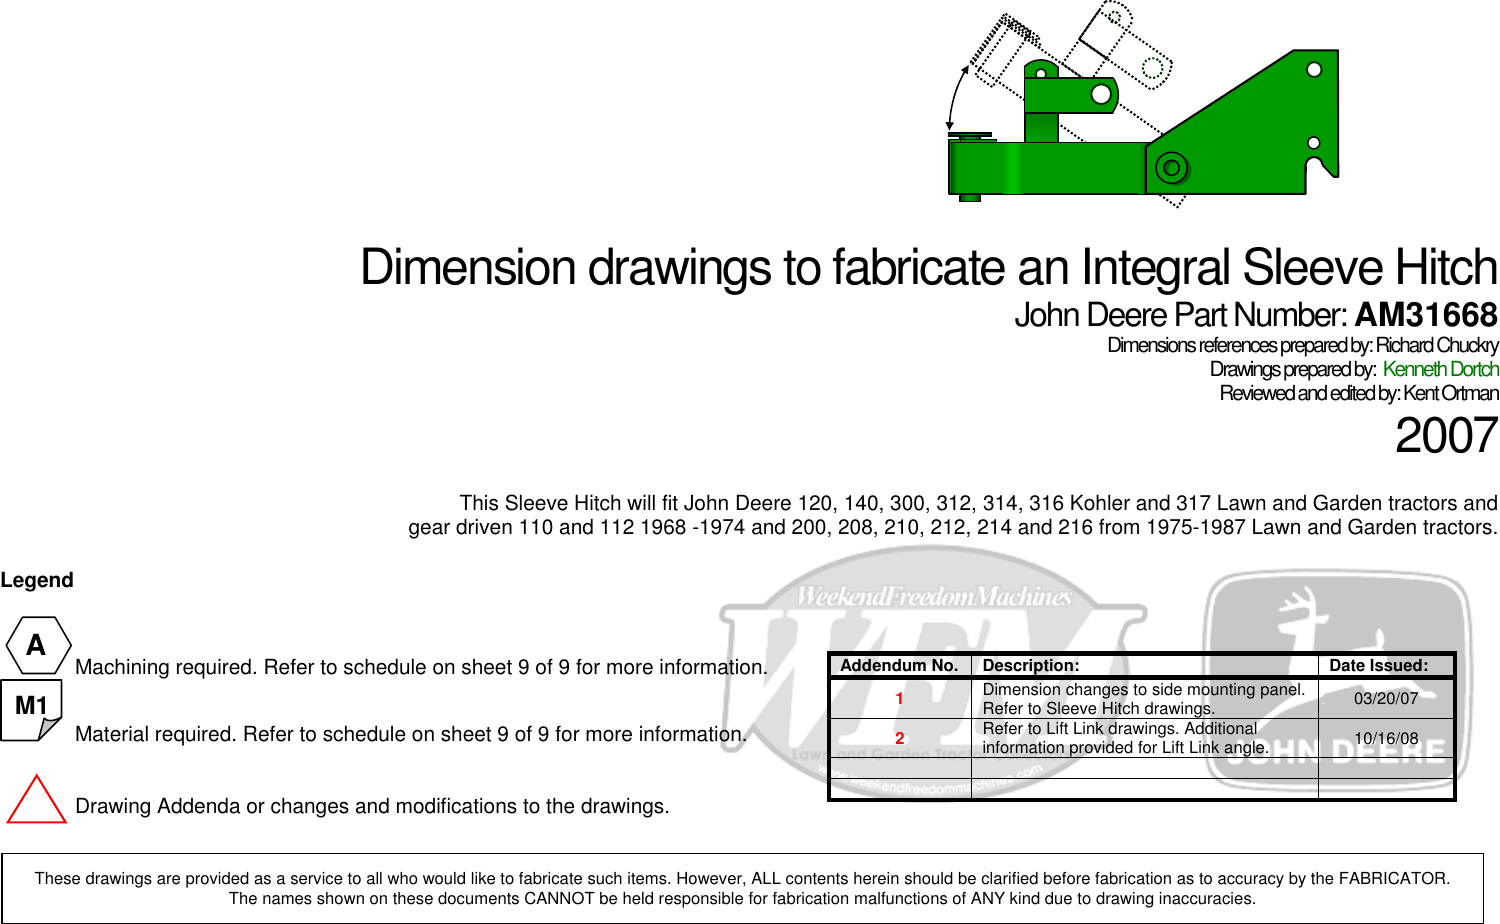 Page 1 of 9 - Integral Sleeve Hitch Dimension Drawings (AM31668) As Of 20081016 Drawings(AM31668)